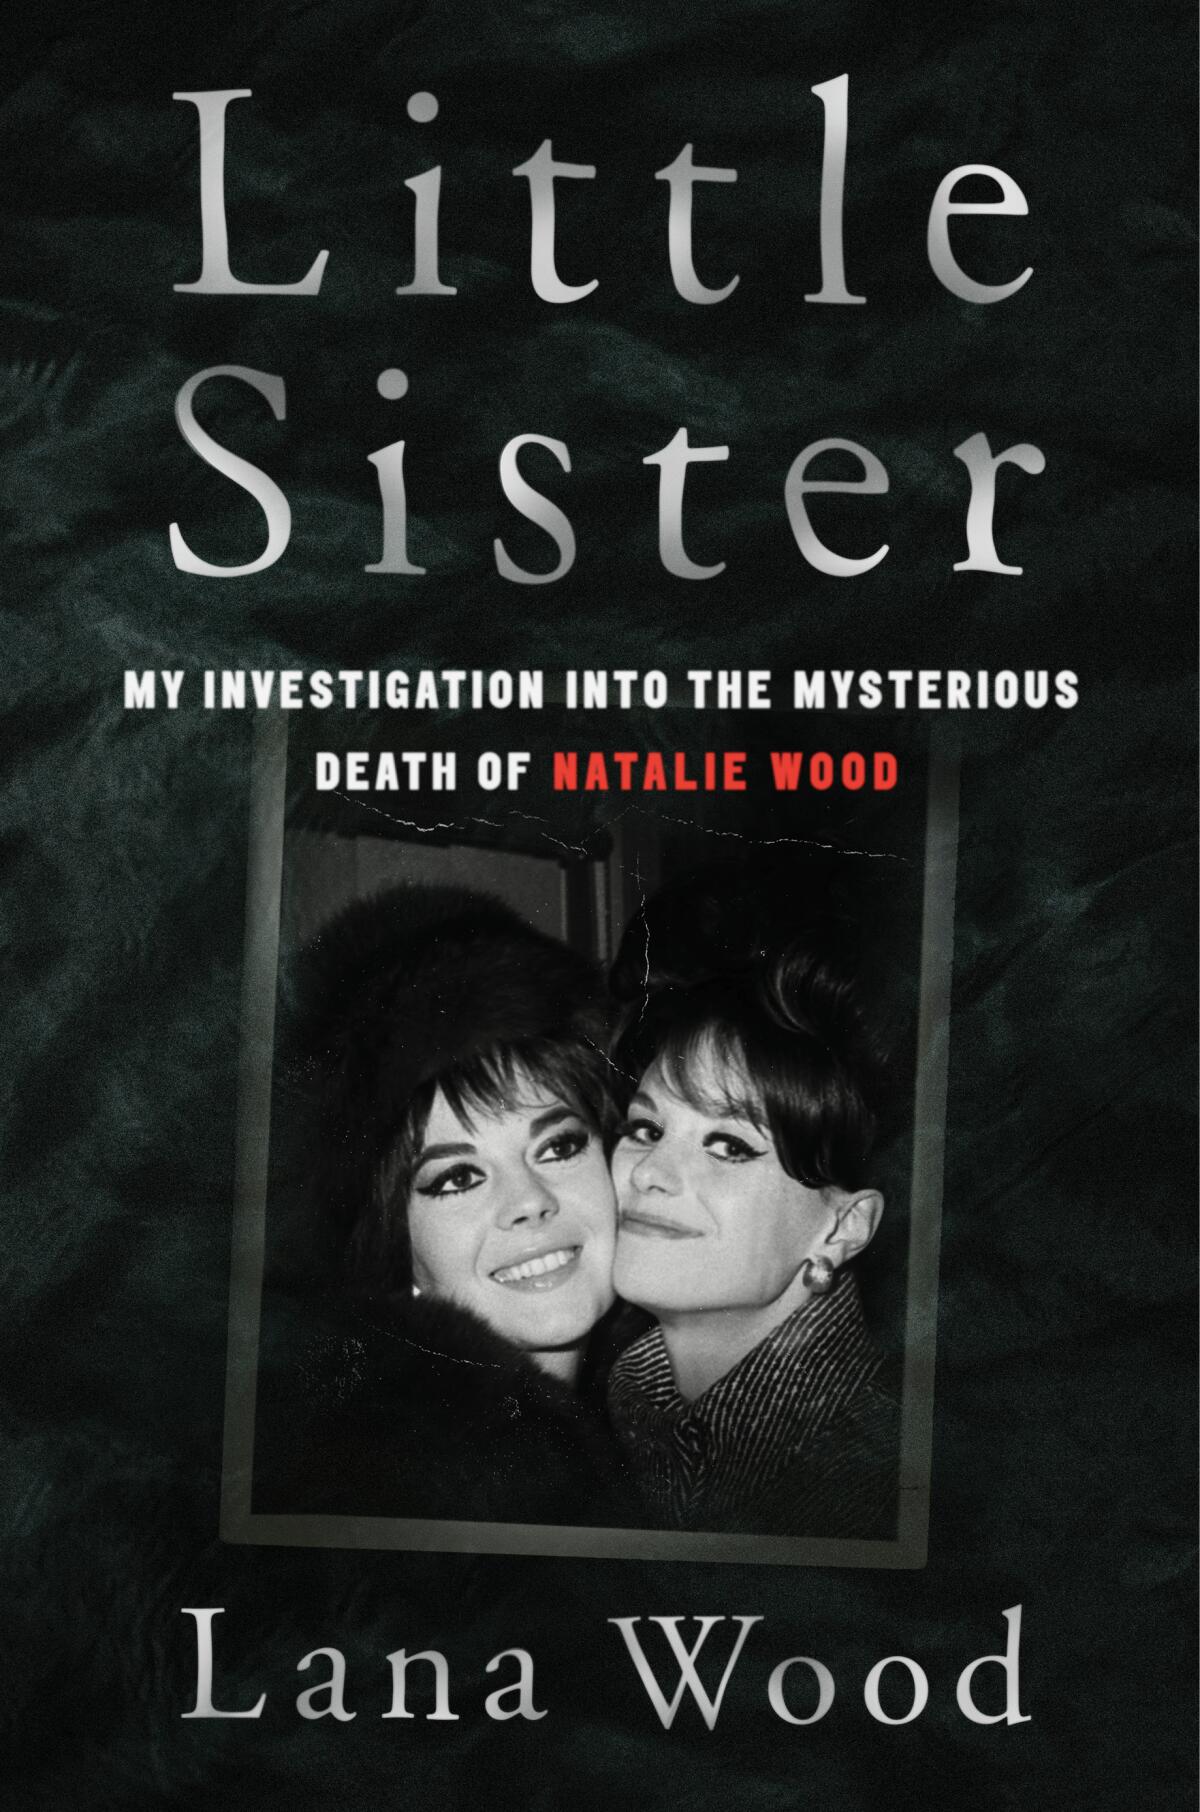 "Little Sister: My Investigation Into the Mysterious Death of Natalie Wood," by Lana Wood